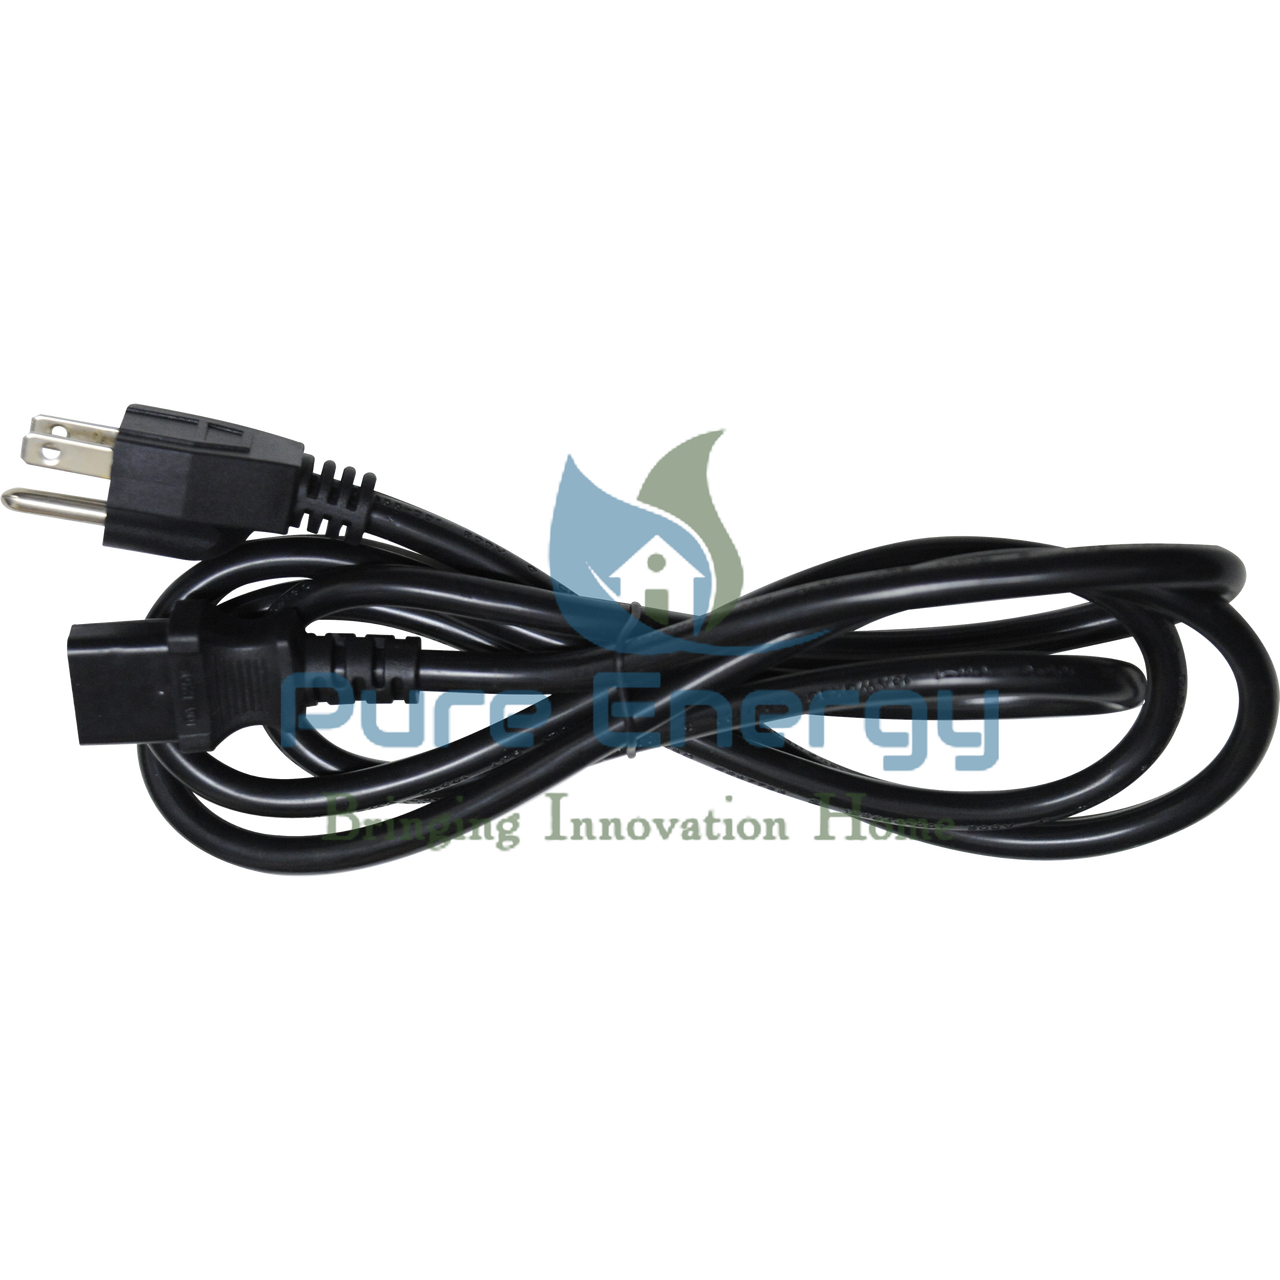 Power Cord for O3 PURE EdenPURE and other Air Purifiers